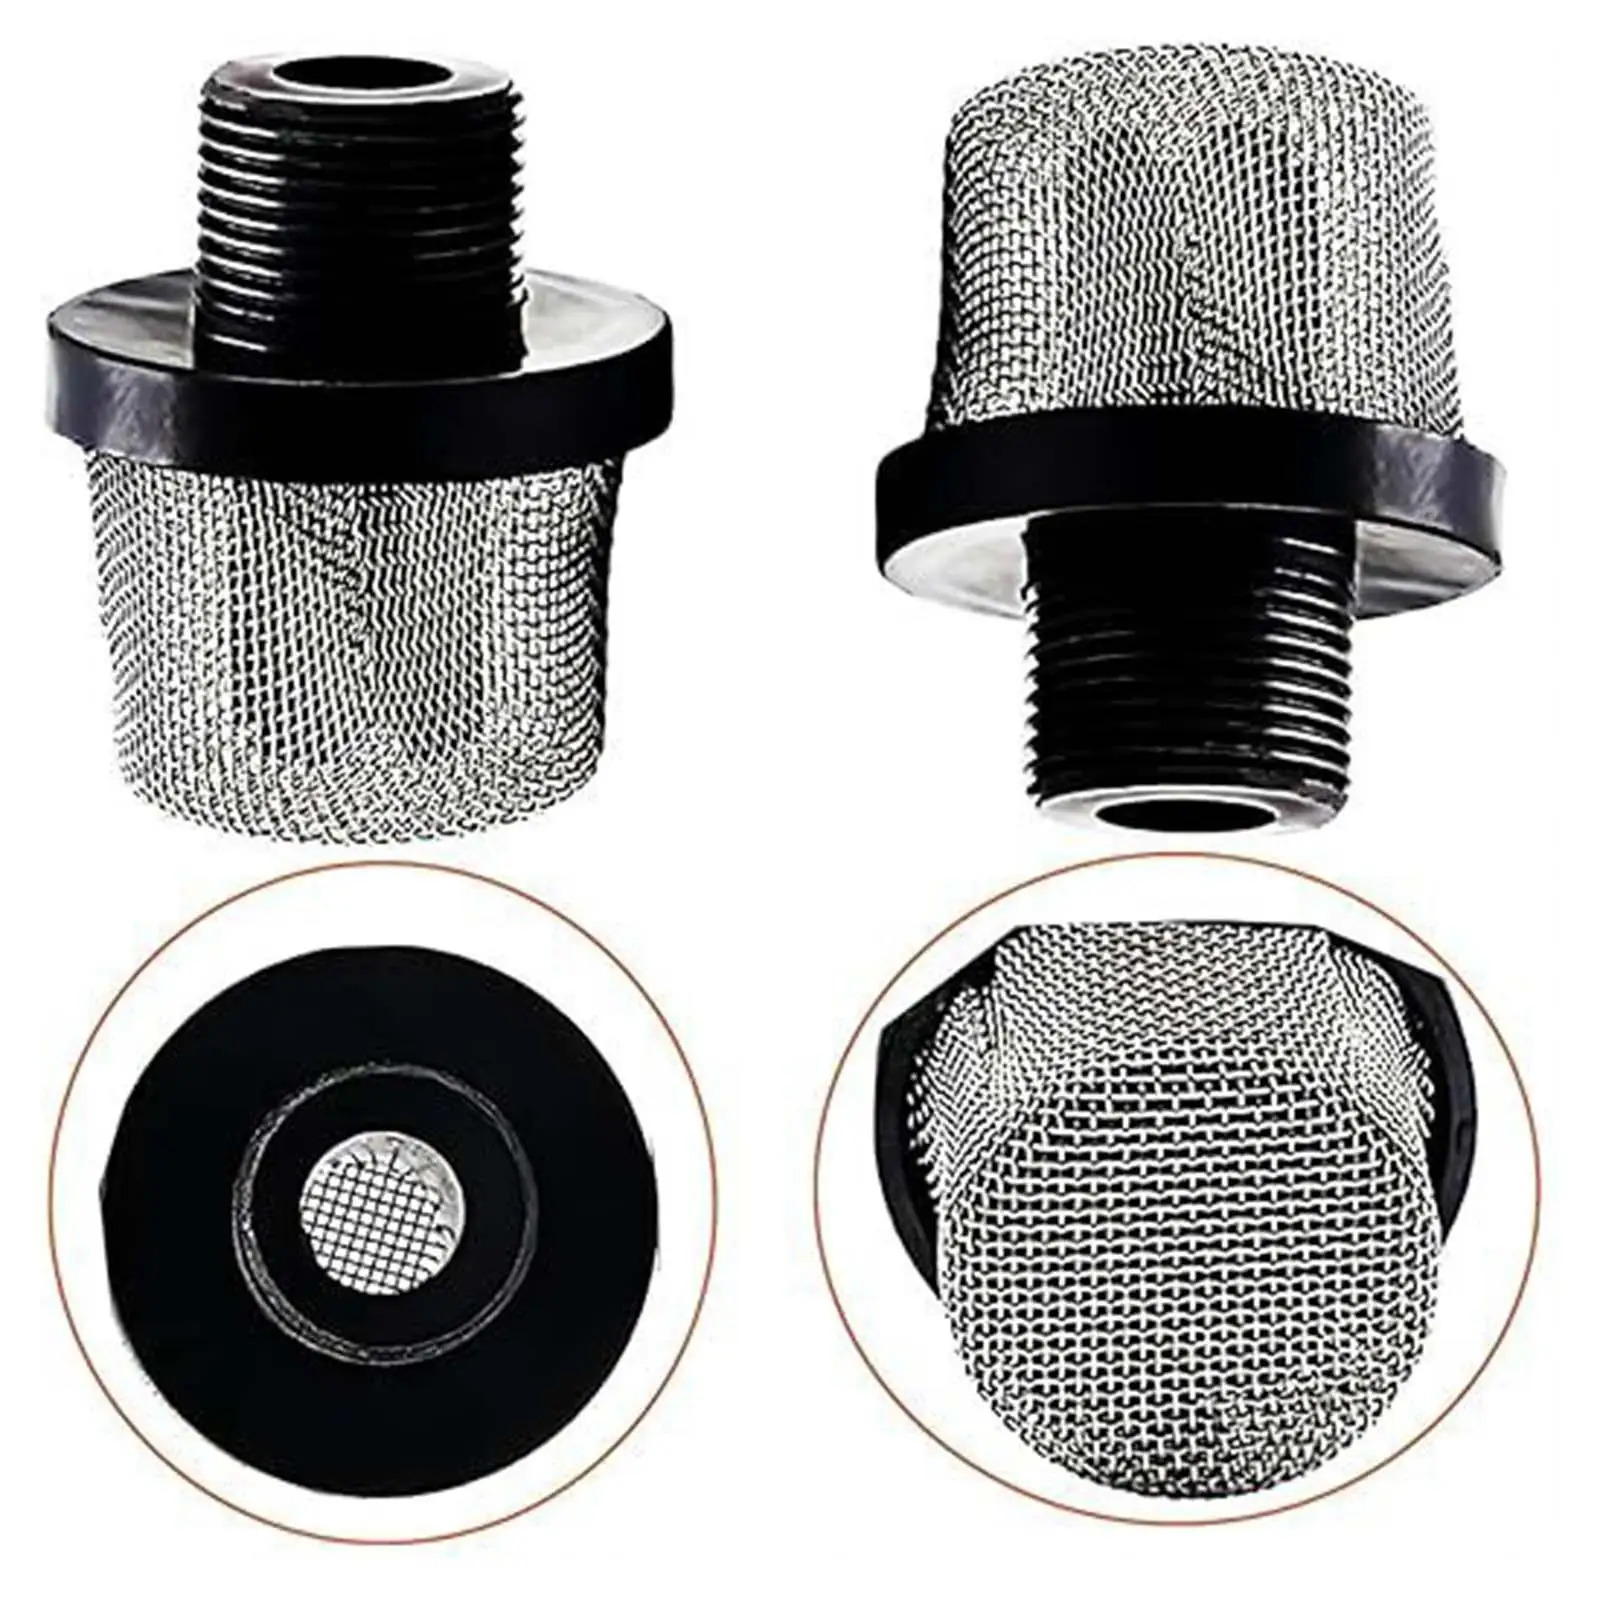 Airless Spray Machine 2x 288716 Screen and 3x 288749 Filter Kit Durable 3/4inch Inlet Strainer Thread Combination Replacements